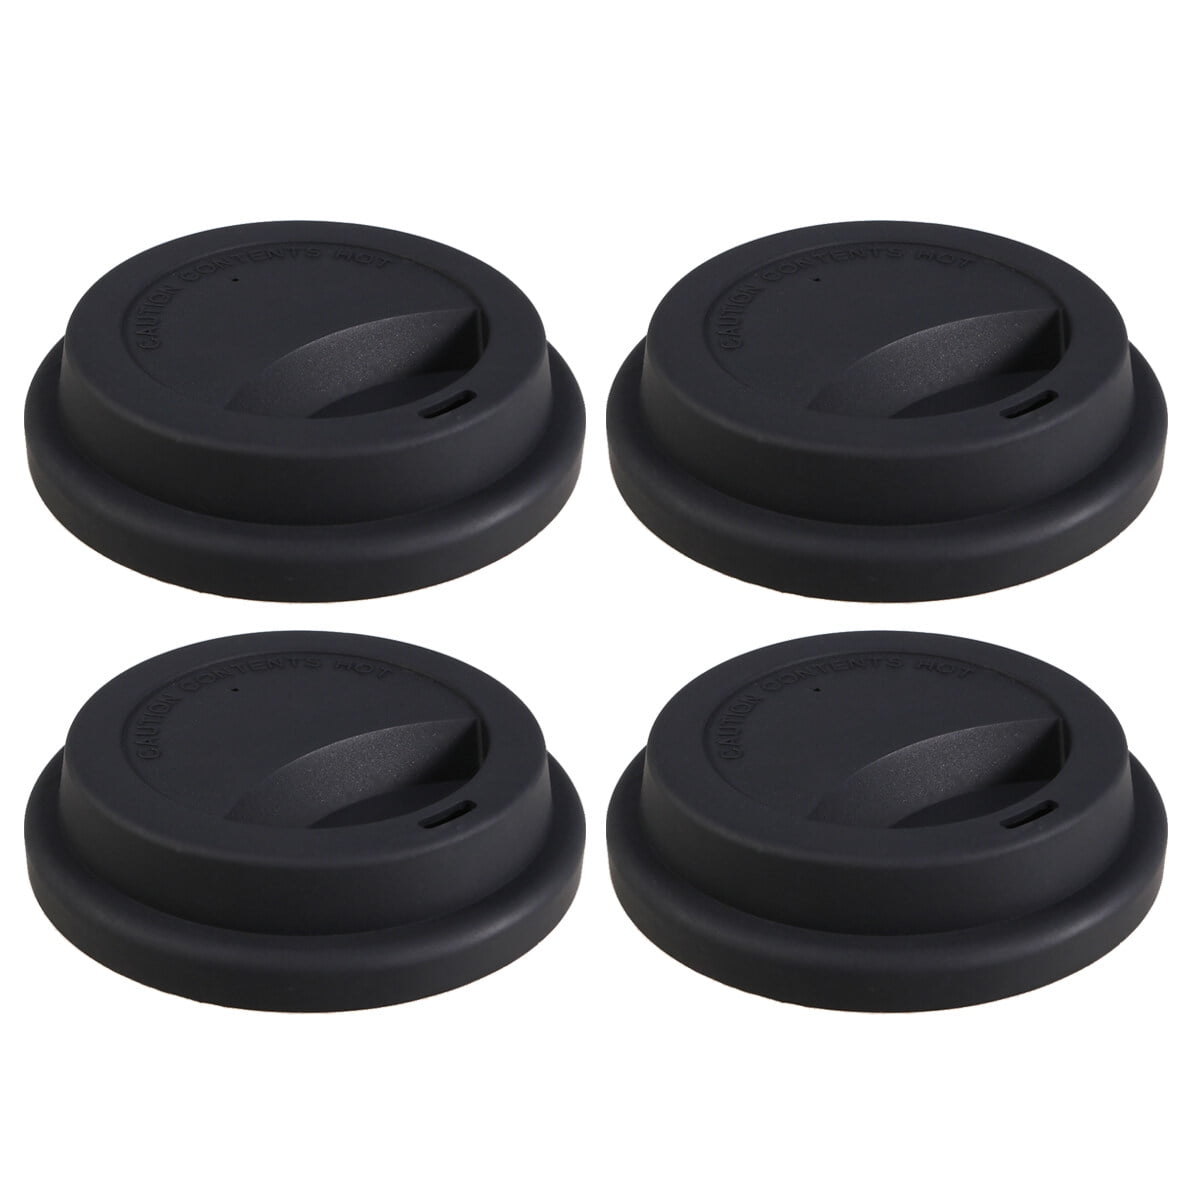 4pcs Silicone Coffee Mug Lids Reusable Travel Cup Covers Dustproof